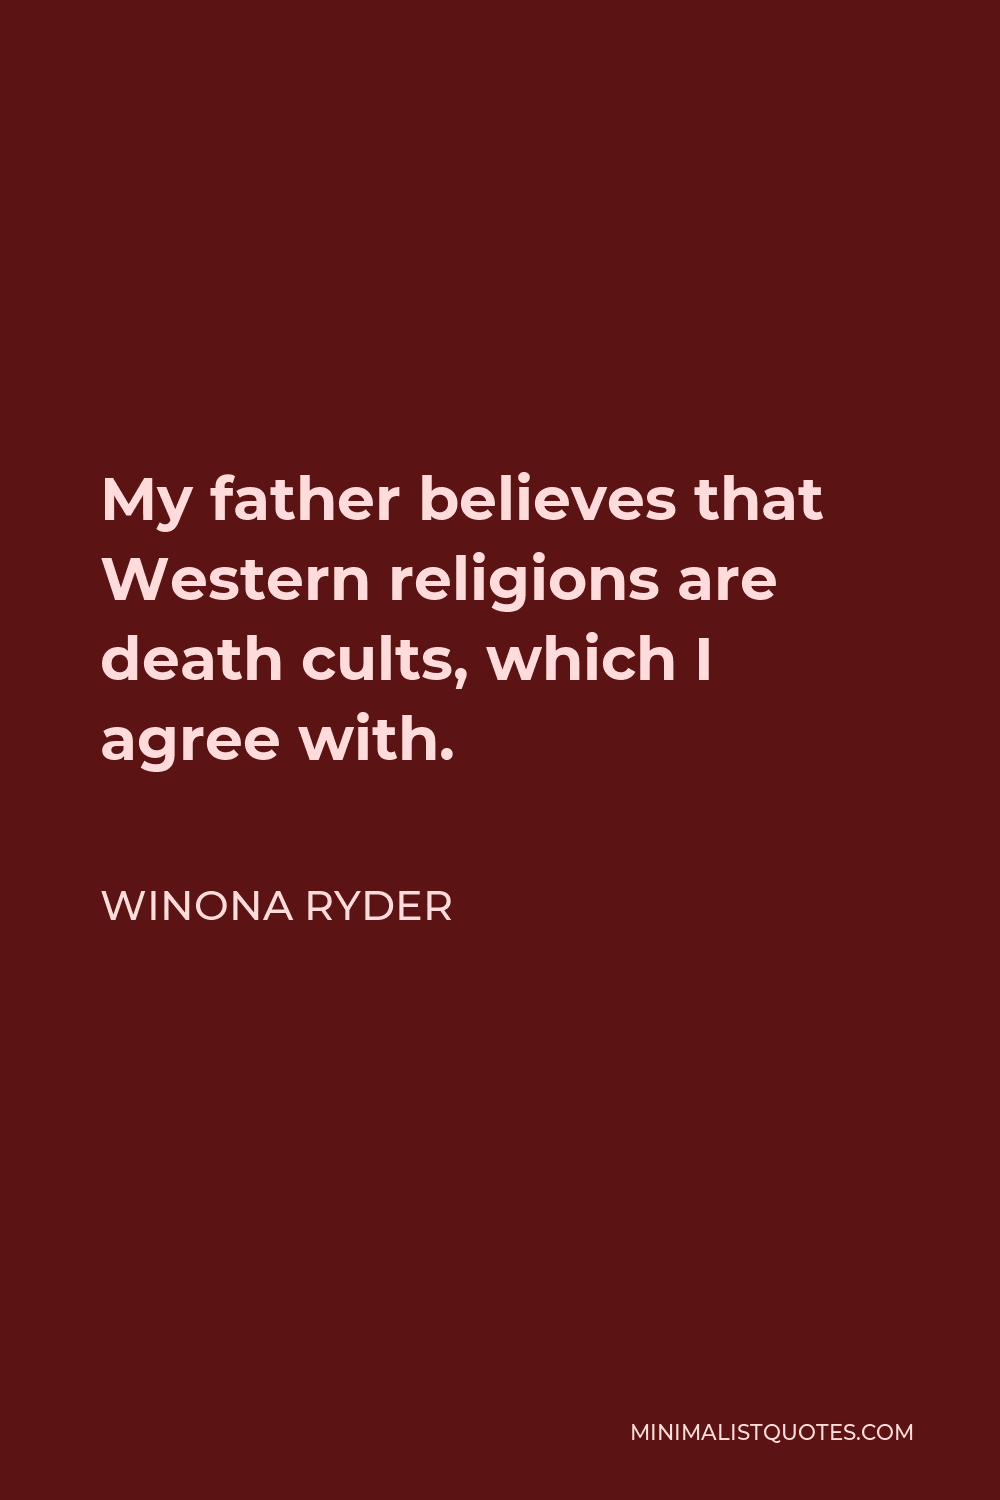 Winona Ryder Quote - My father believes that Western religions are death cults, which I agree with.